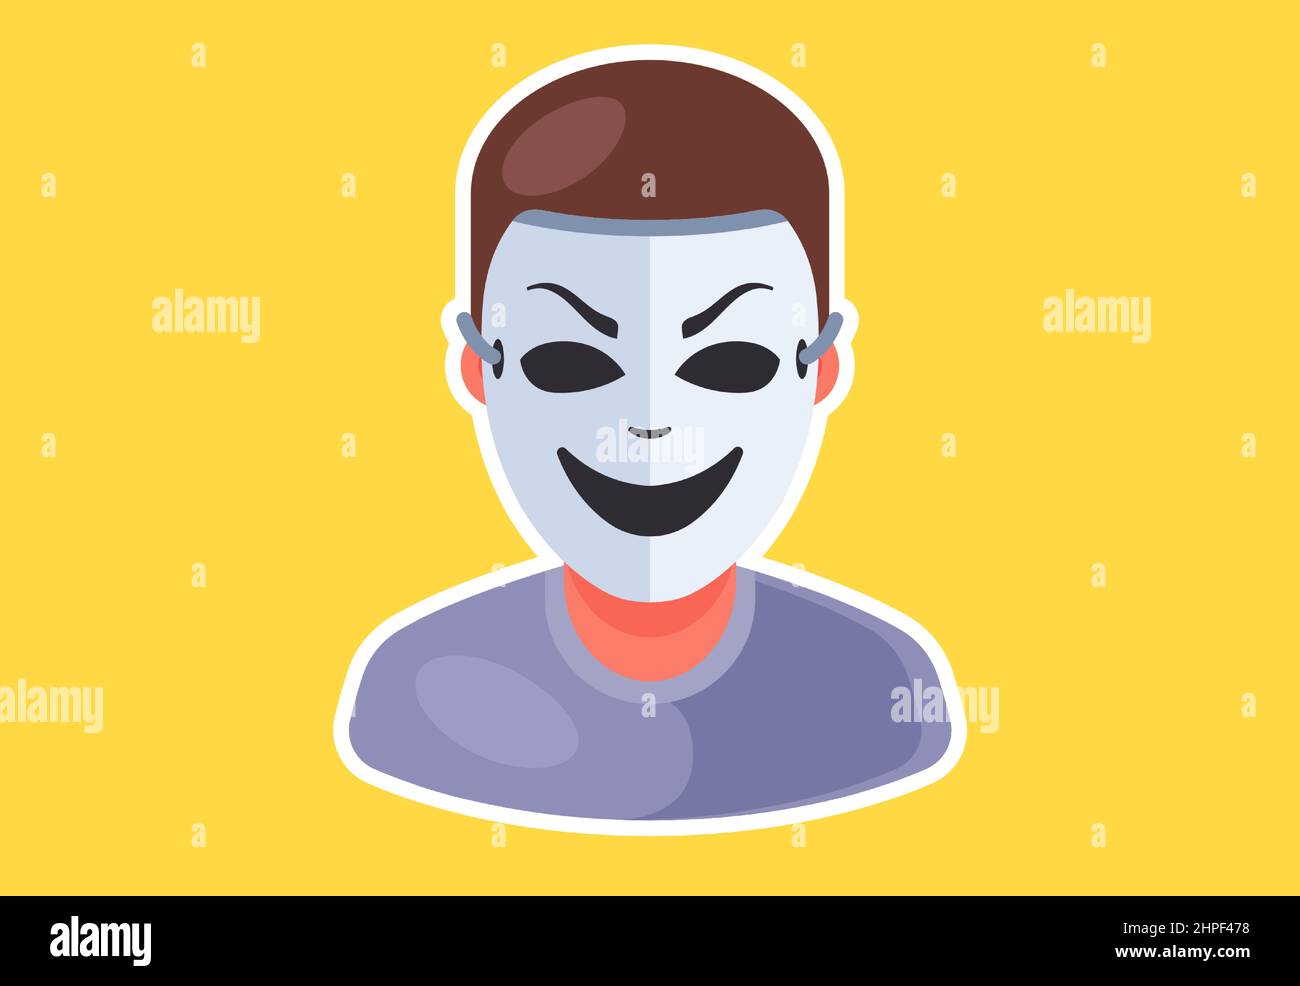 masked man icon. rip off a person. Flat character vector illustration. Stock Vector